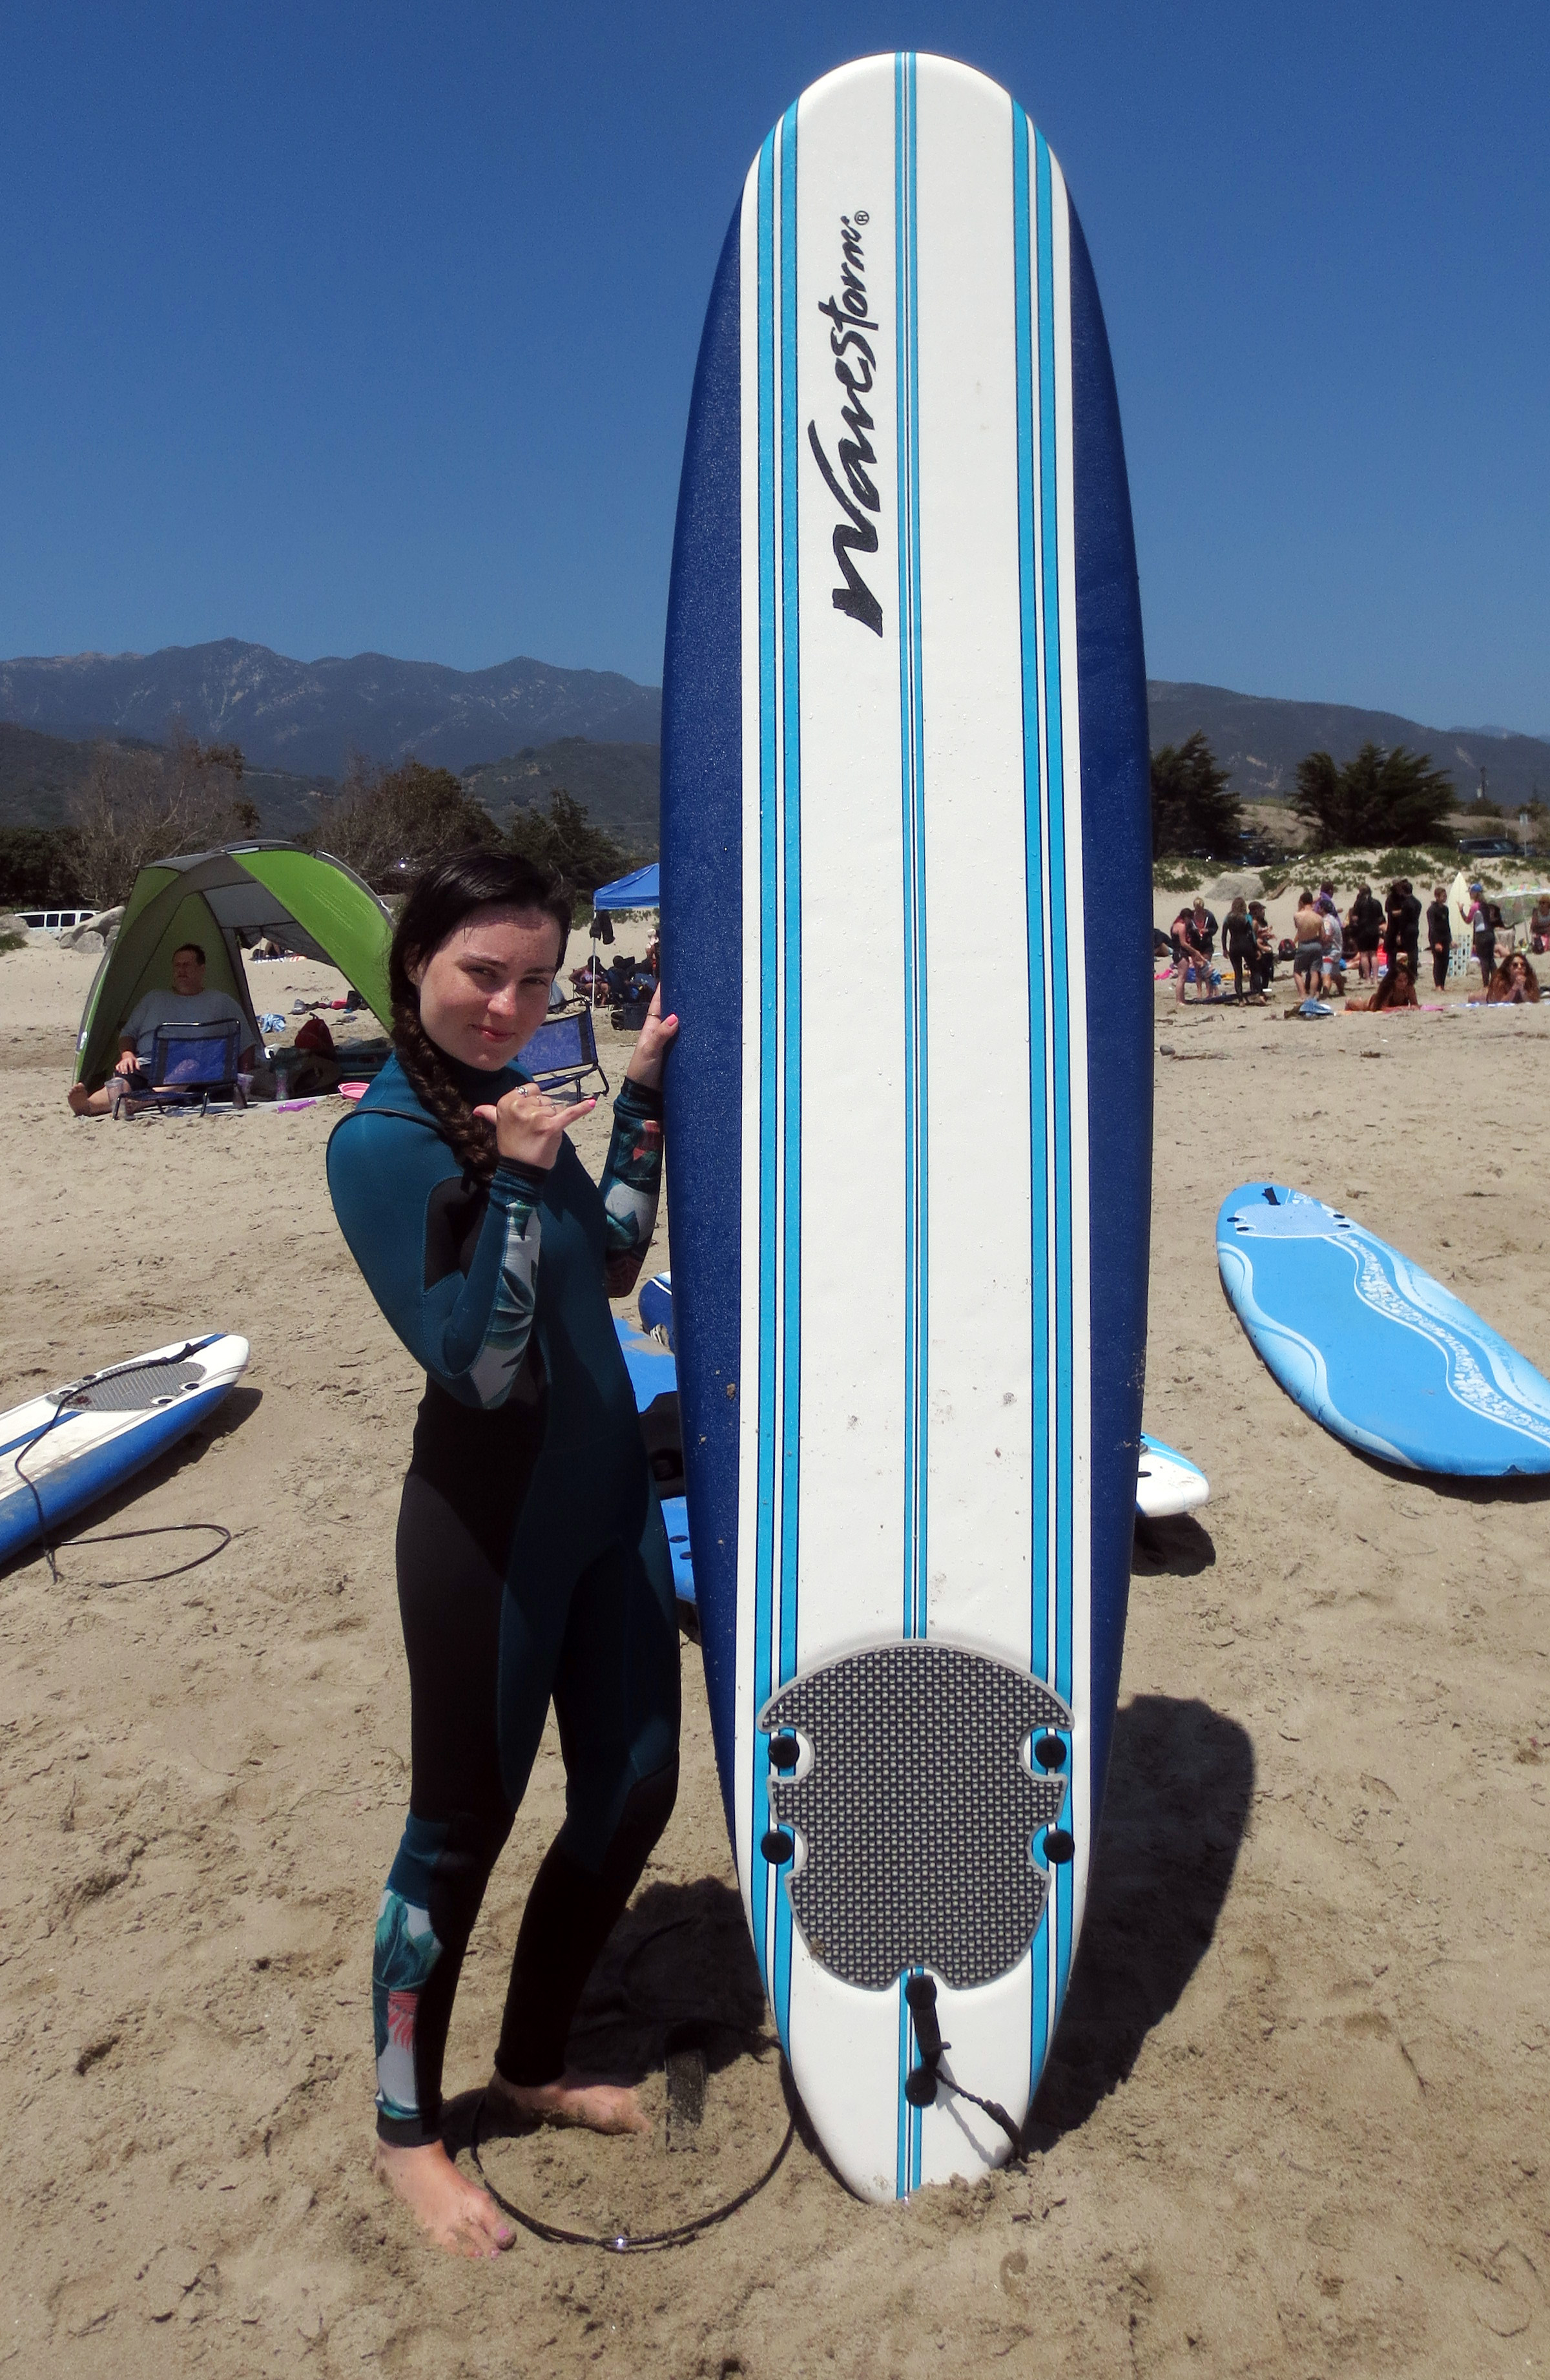 AMI This Week’s Molly Burke holds her surfboard on a sunny California beach wearing a stylish Billabong wetsuit. The surfboard is much taller than she is.